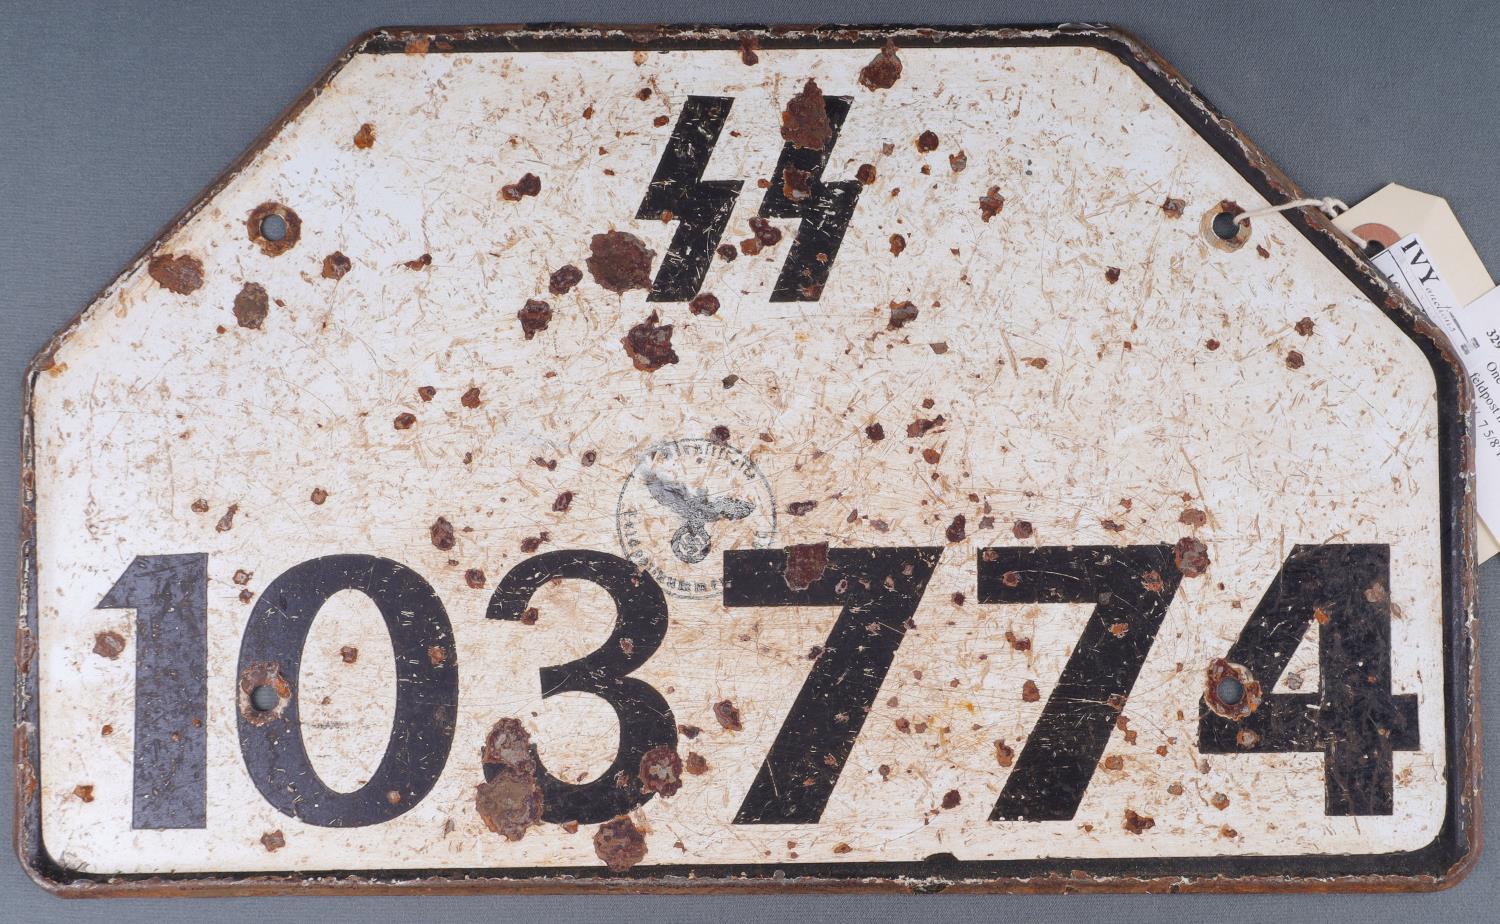 WWII GERMAN SS LICENSE PLATE